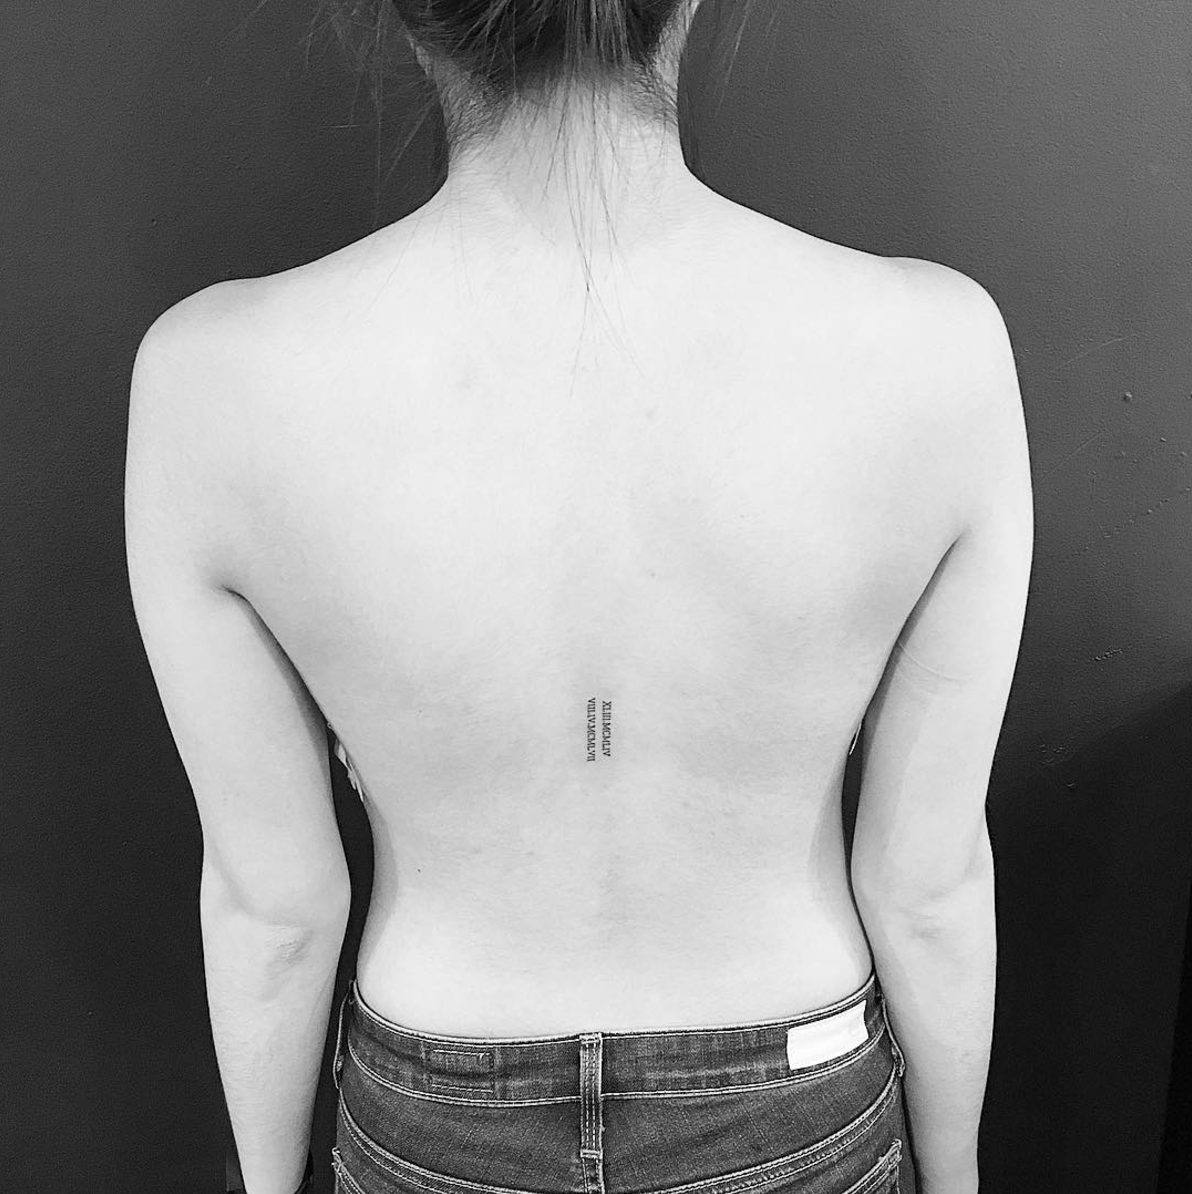 Beguiling Easy Small Back Tattoo - Small Back Tattoos - Small Tattoos